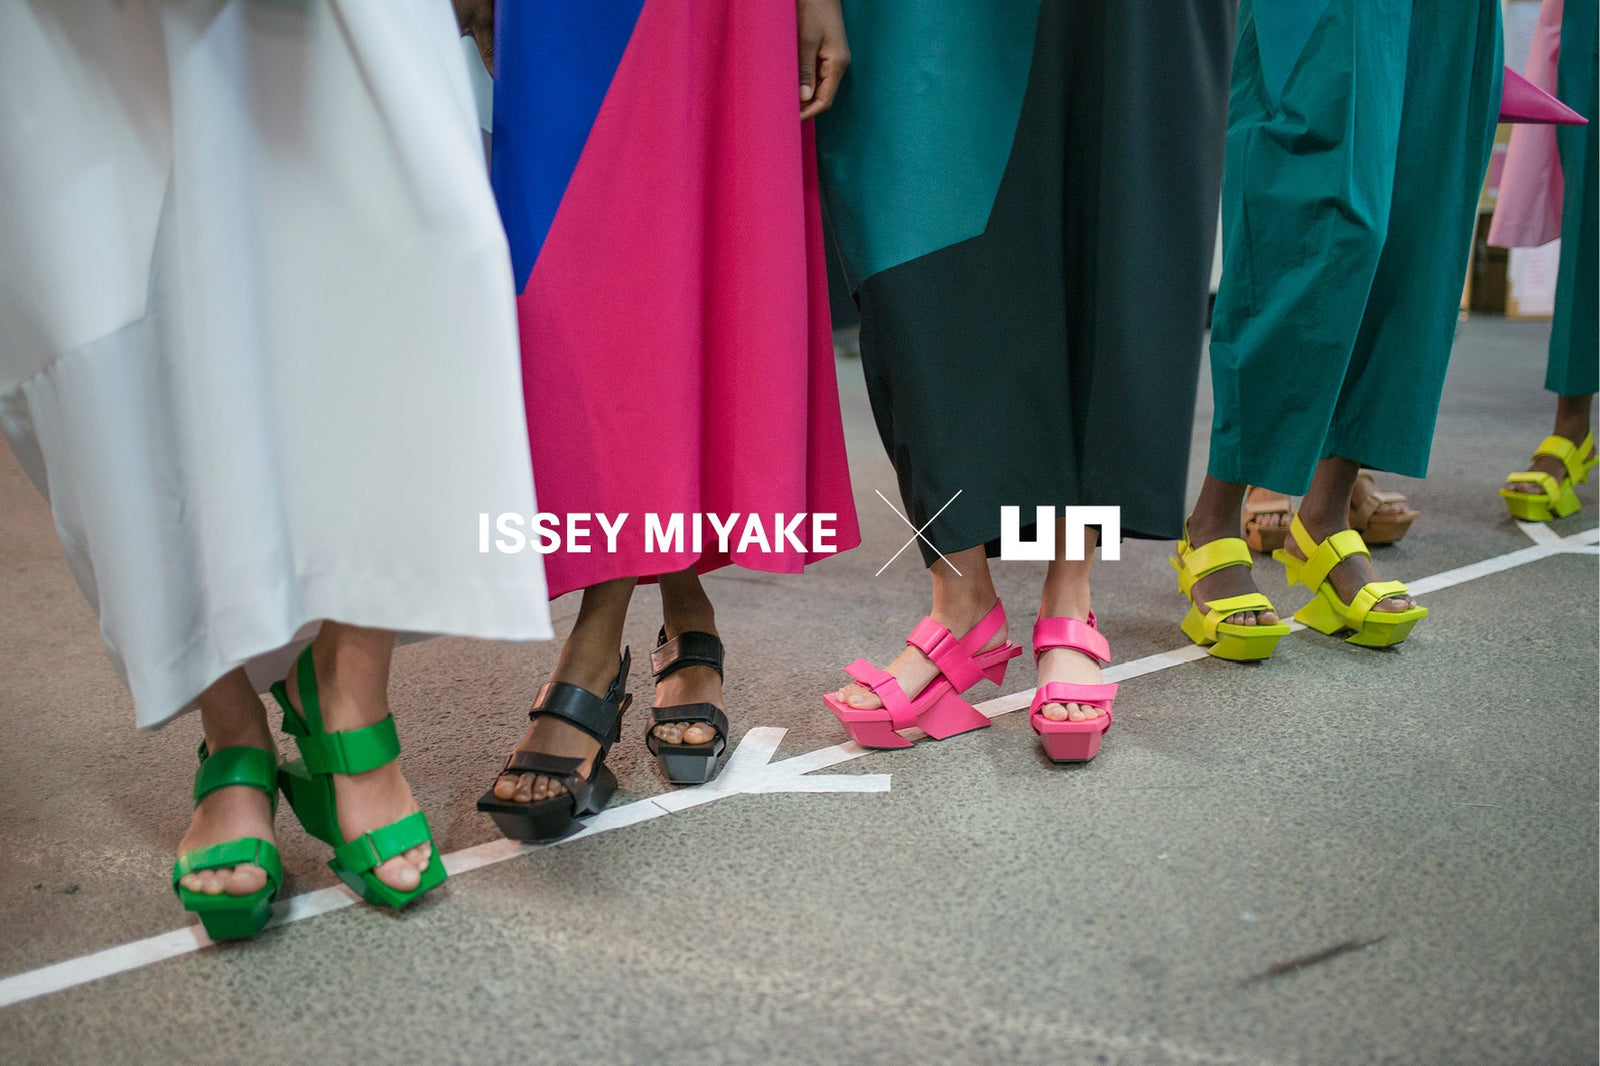 ISSEY MIYAKE X UN SHOE PROJECTS THROUGHOUT THE YEARS